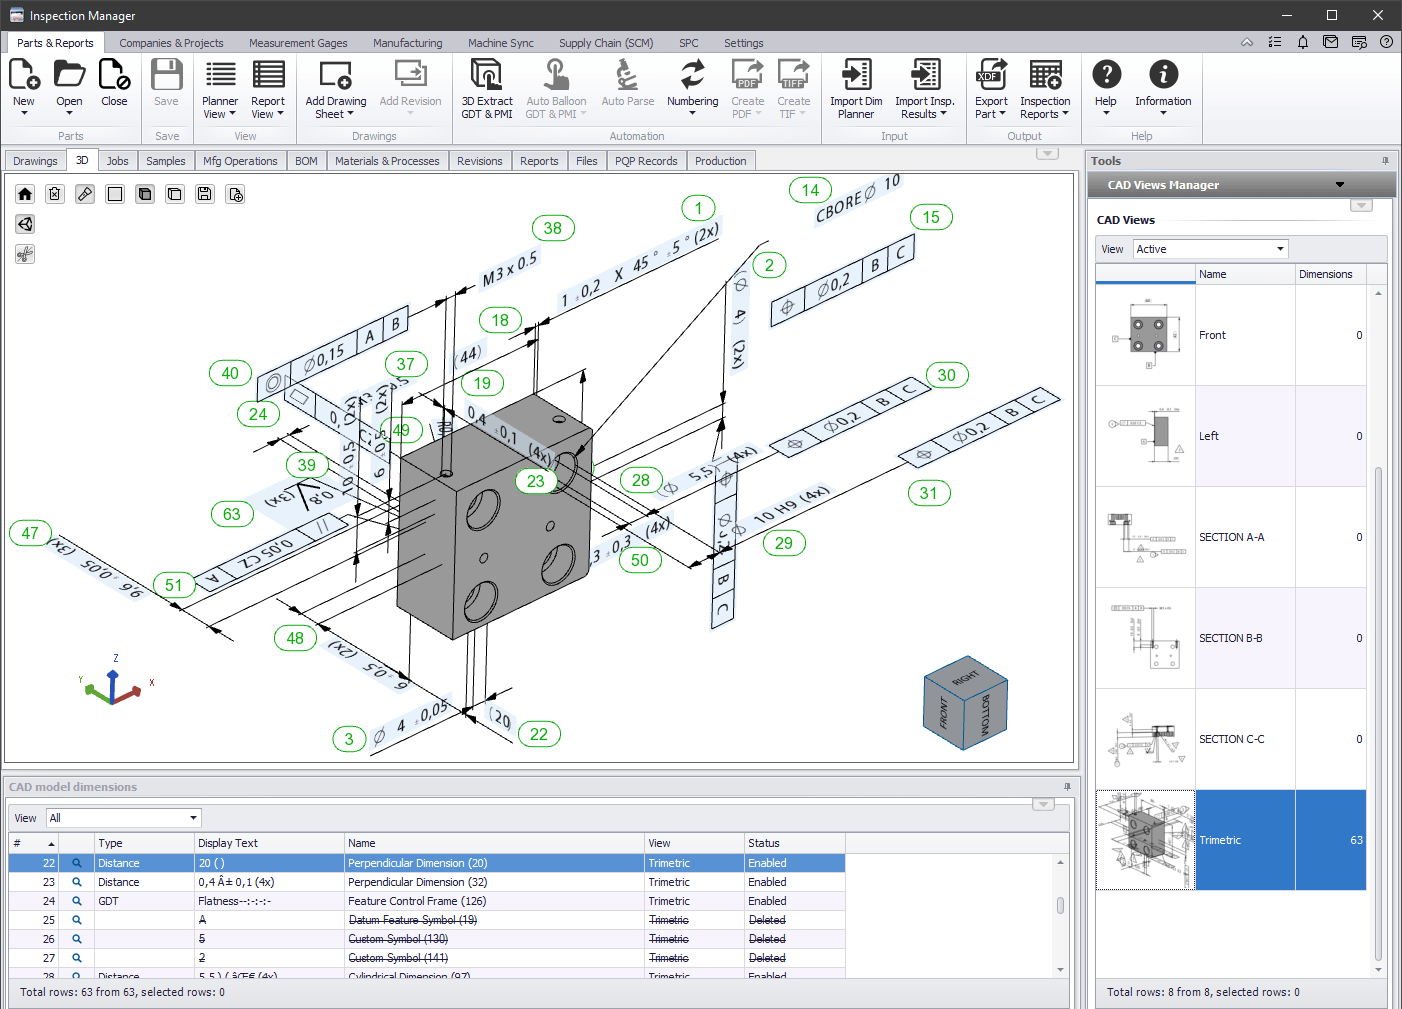 High QA incorporates 3D MBD files into Inspection Manager